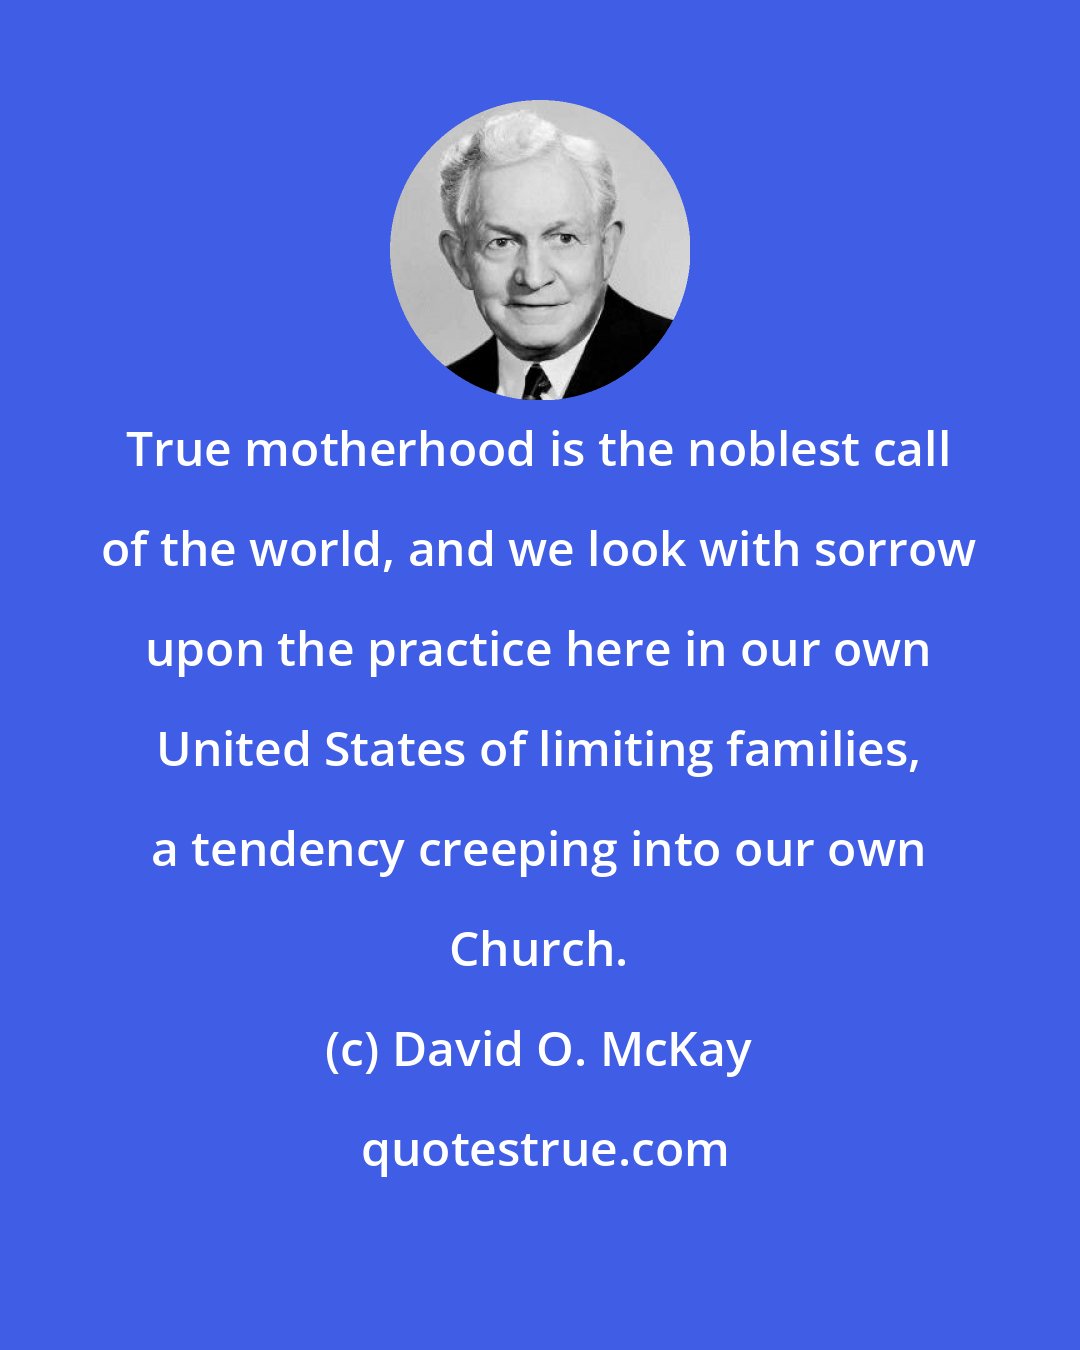 David O. McKay: True motherhood is the noblest call of the world, and we look with sorrow upon the practice here in our own United States of limiting families, a tendency creeping into our own Church.